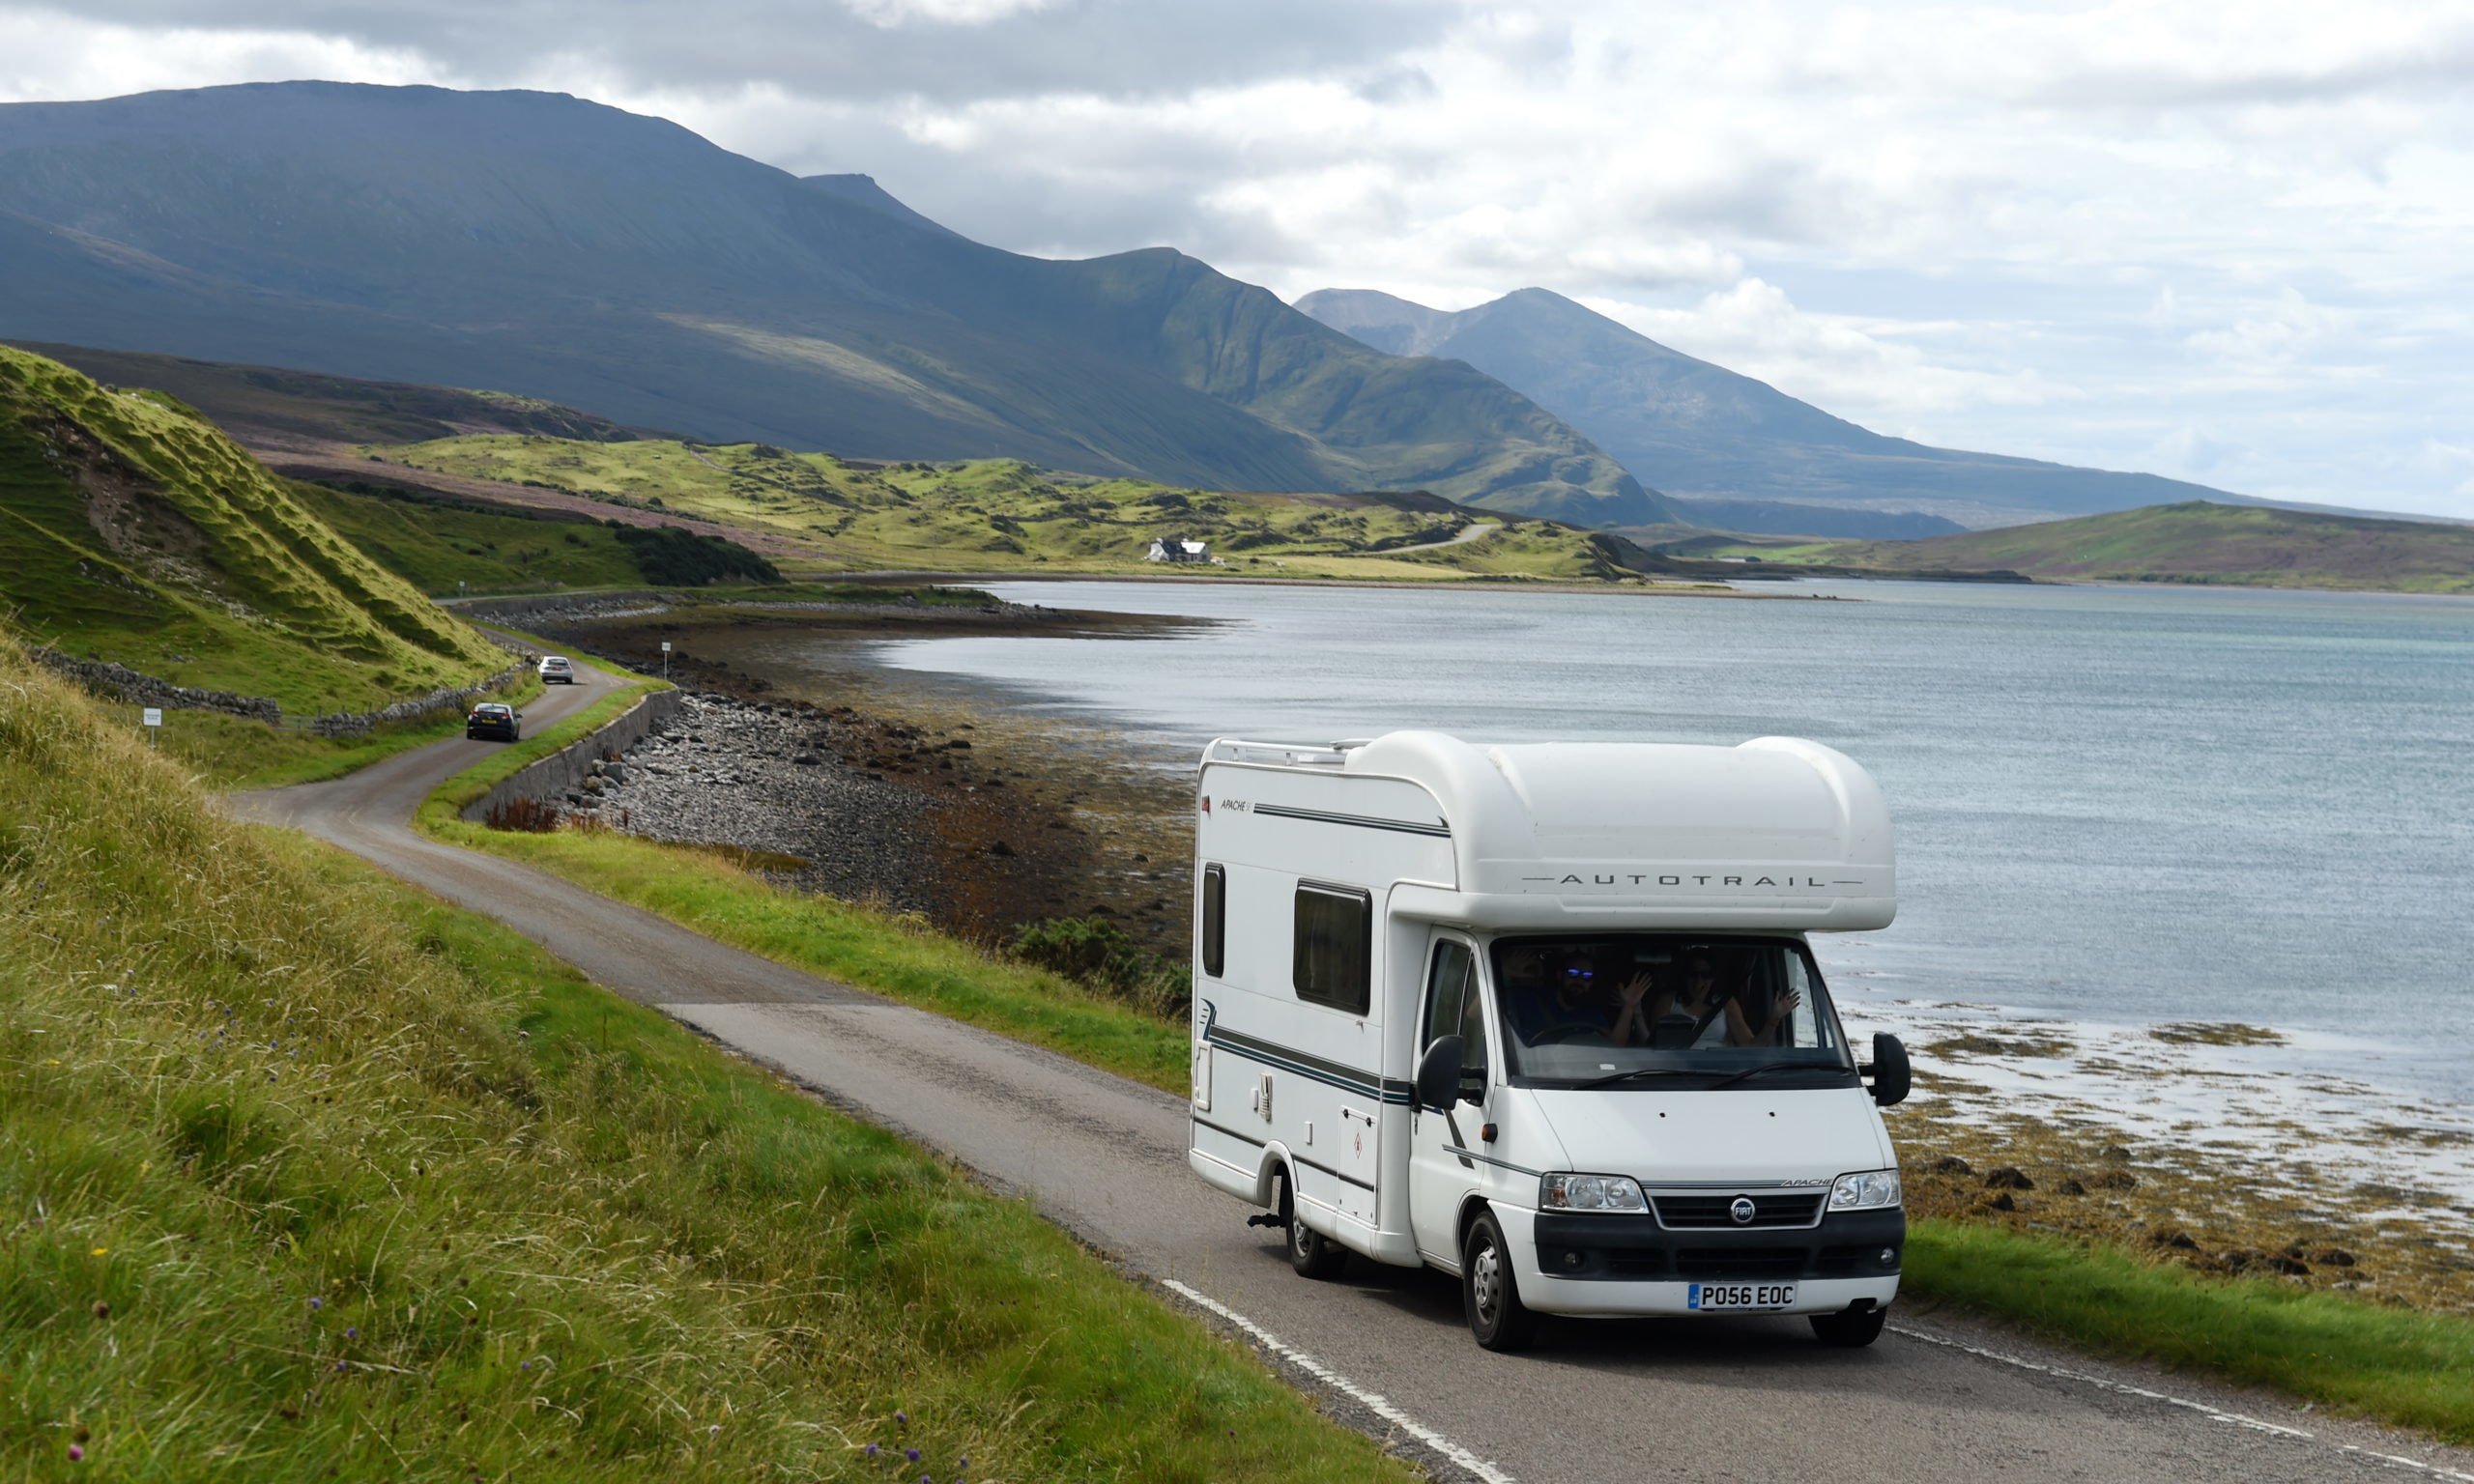 Picture by SANDY McCOOK  25th August '20
CR0023008   Motorhomes on the single track road alongside the Kyle of Durness in Sutherland, part of the NC500. Wild and 'Dirty Camping' problems in Northwest Sutherland, particularly the Durness area.